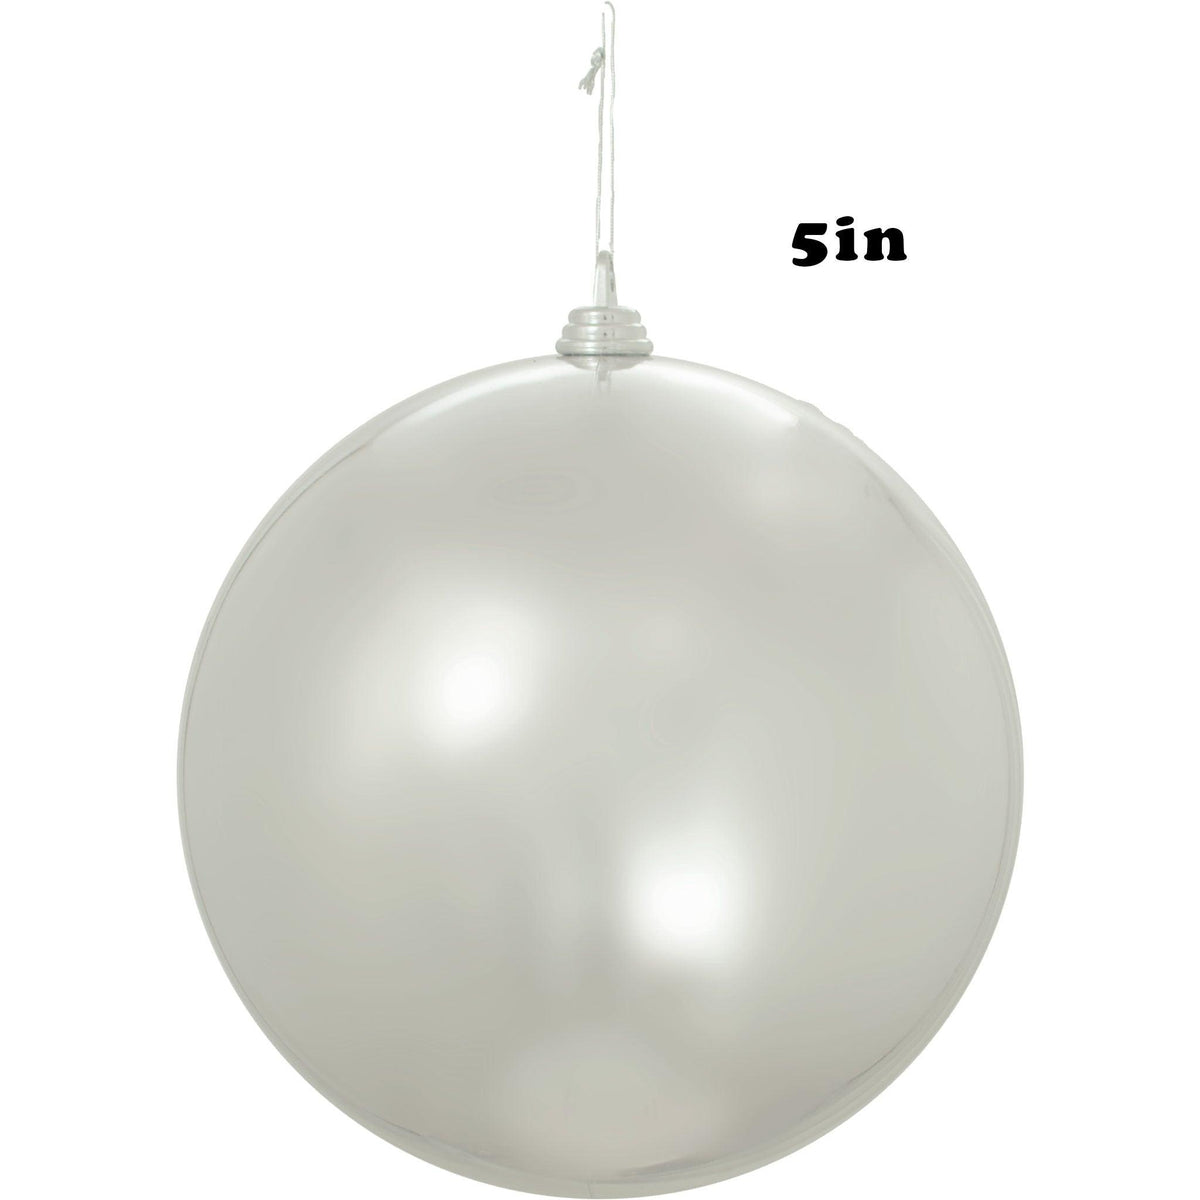 Lee Display offers brand new Shiny Silver Plastic Ball Ornaments at wholesale prices for affordable Christmas Tree Hanging and Holiday Decorating on sale at leedisplay.com